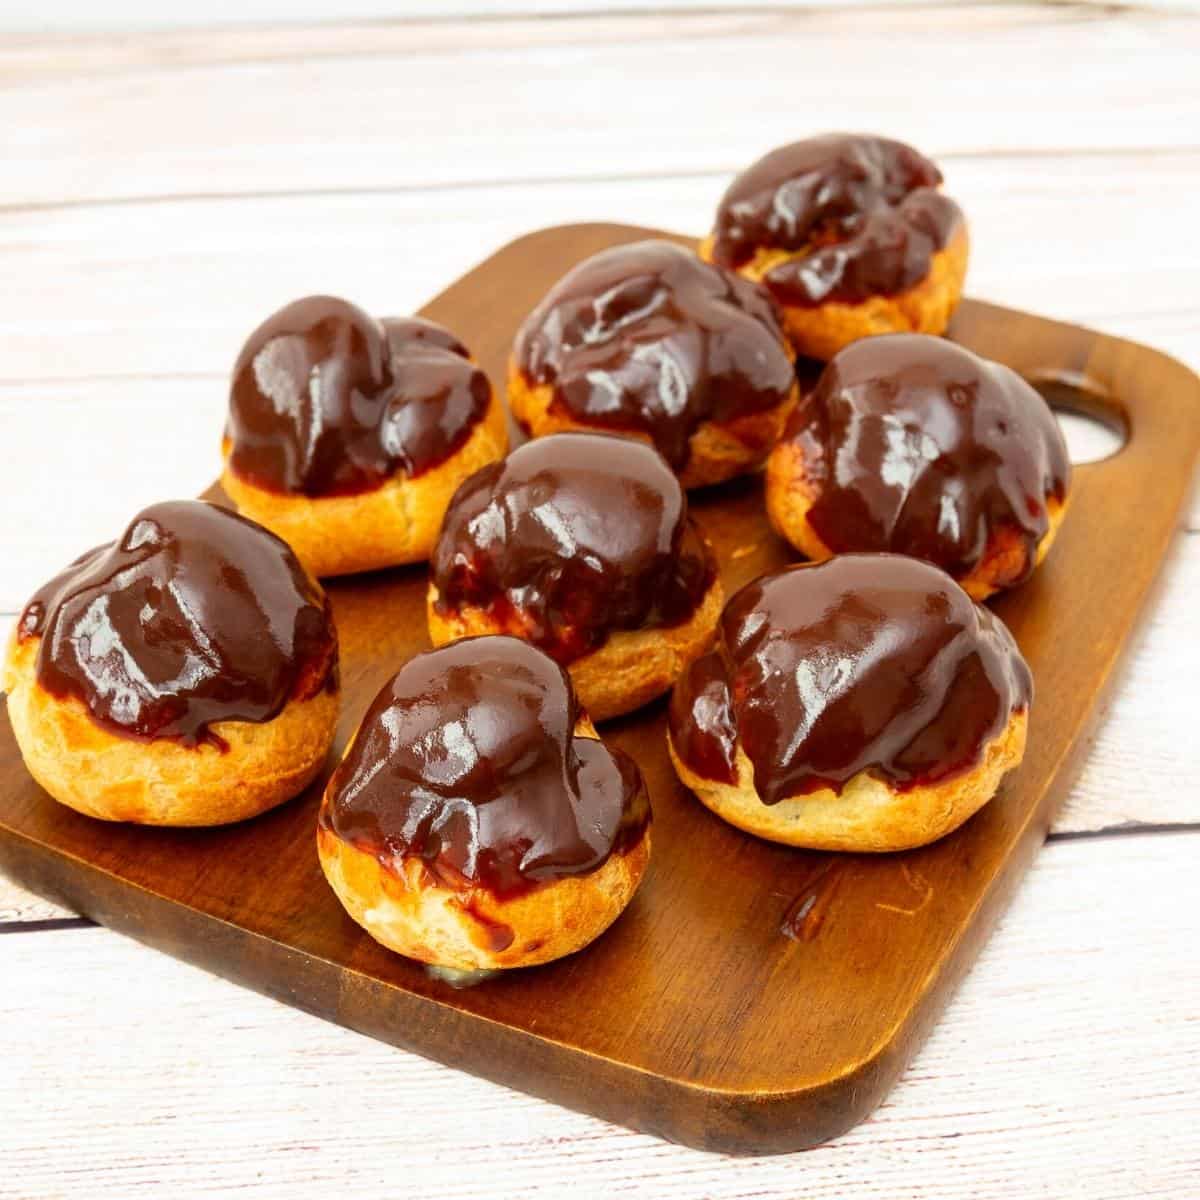 A wooden board with profiteroles.